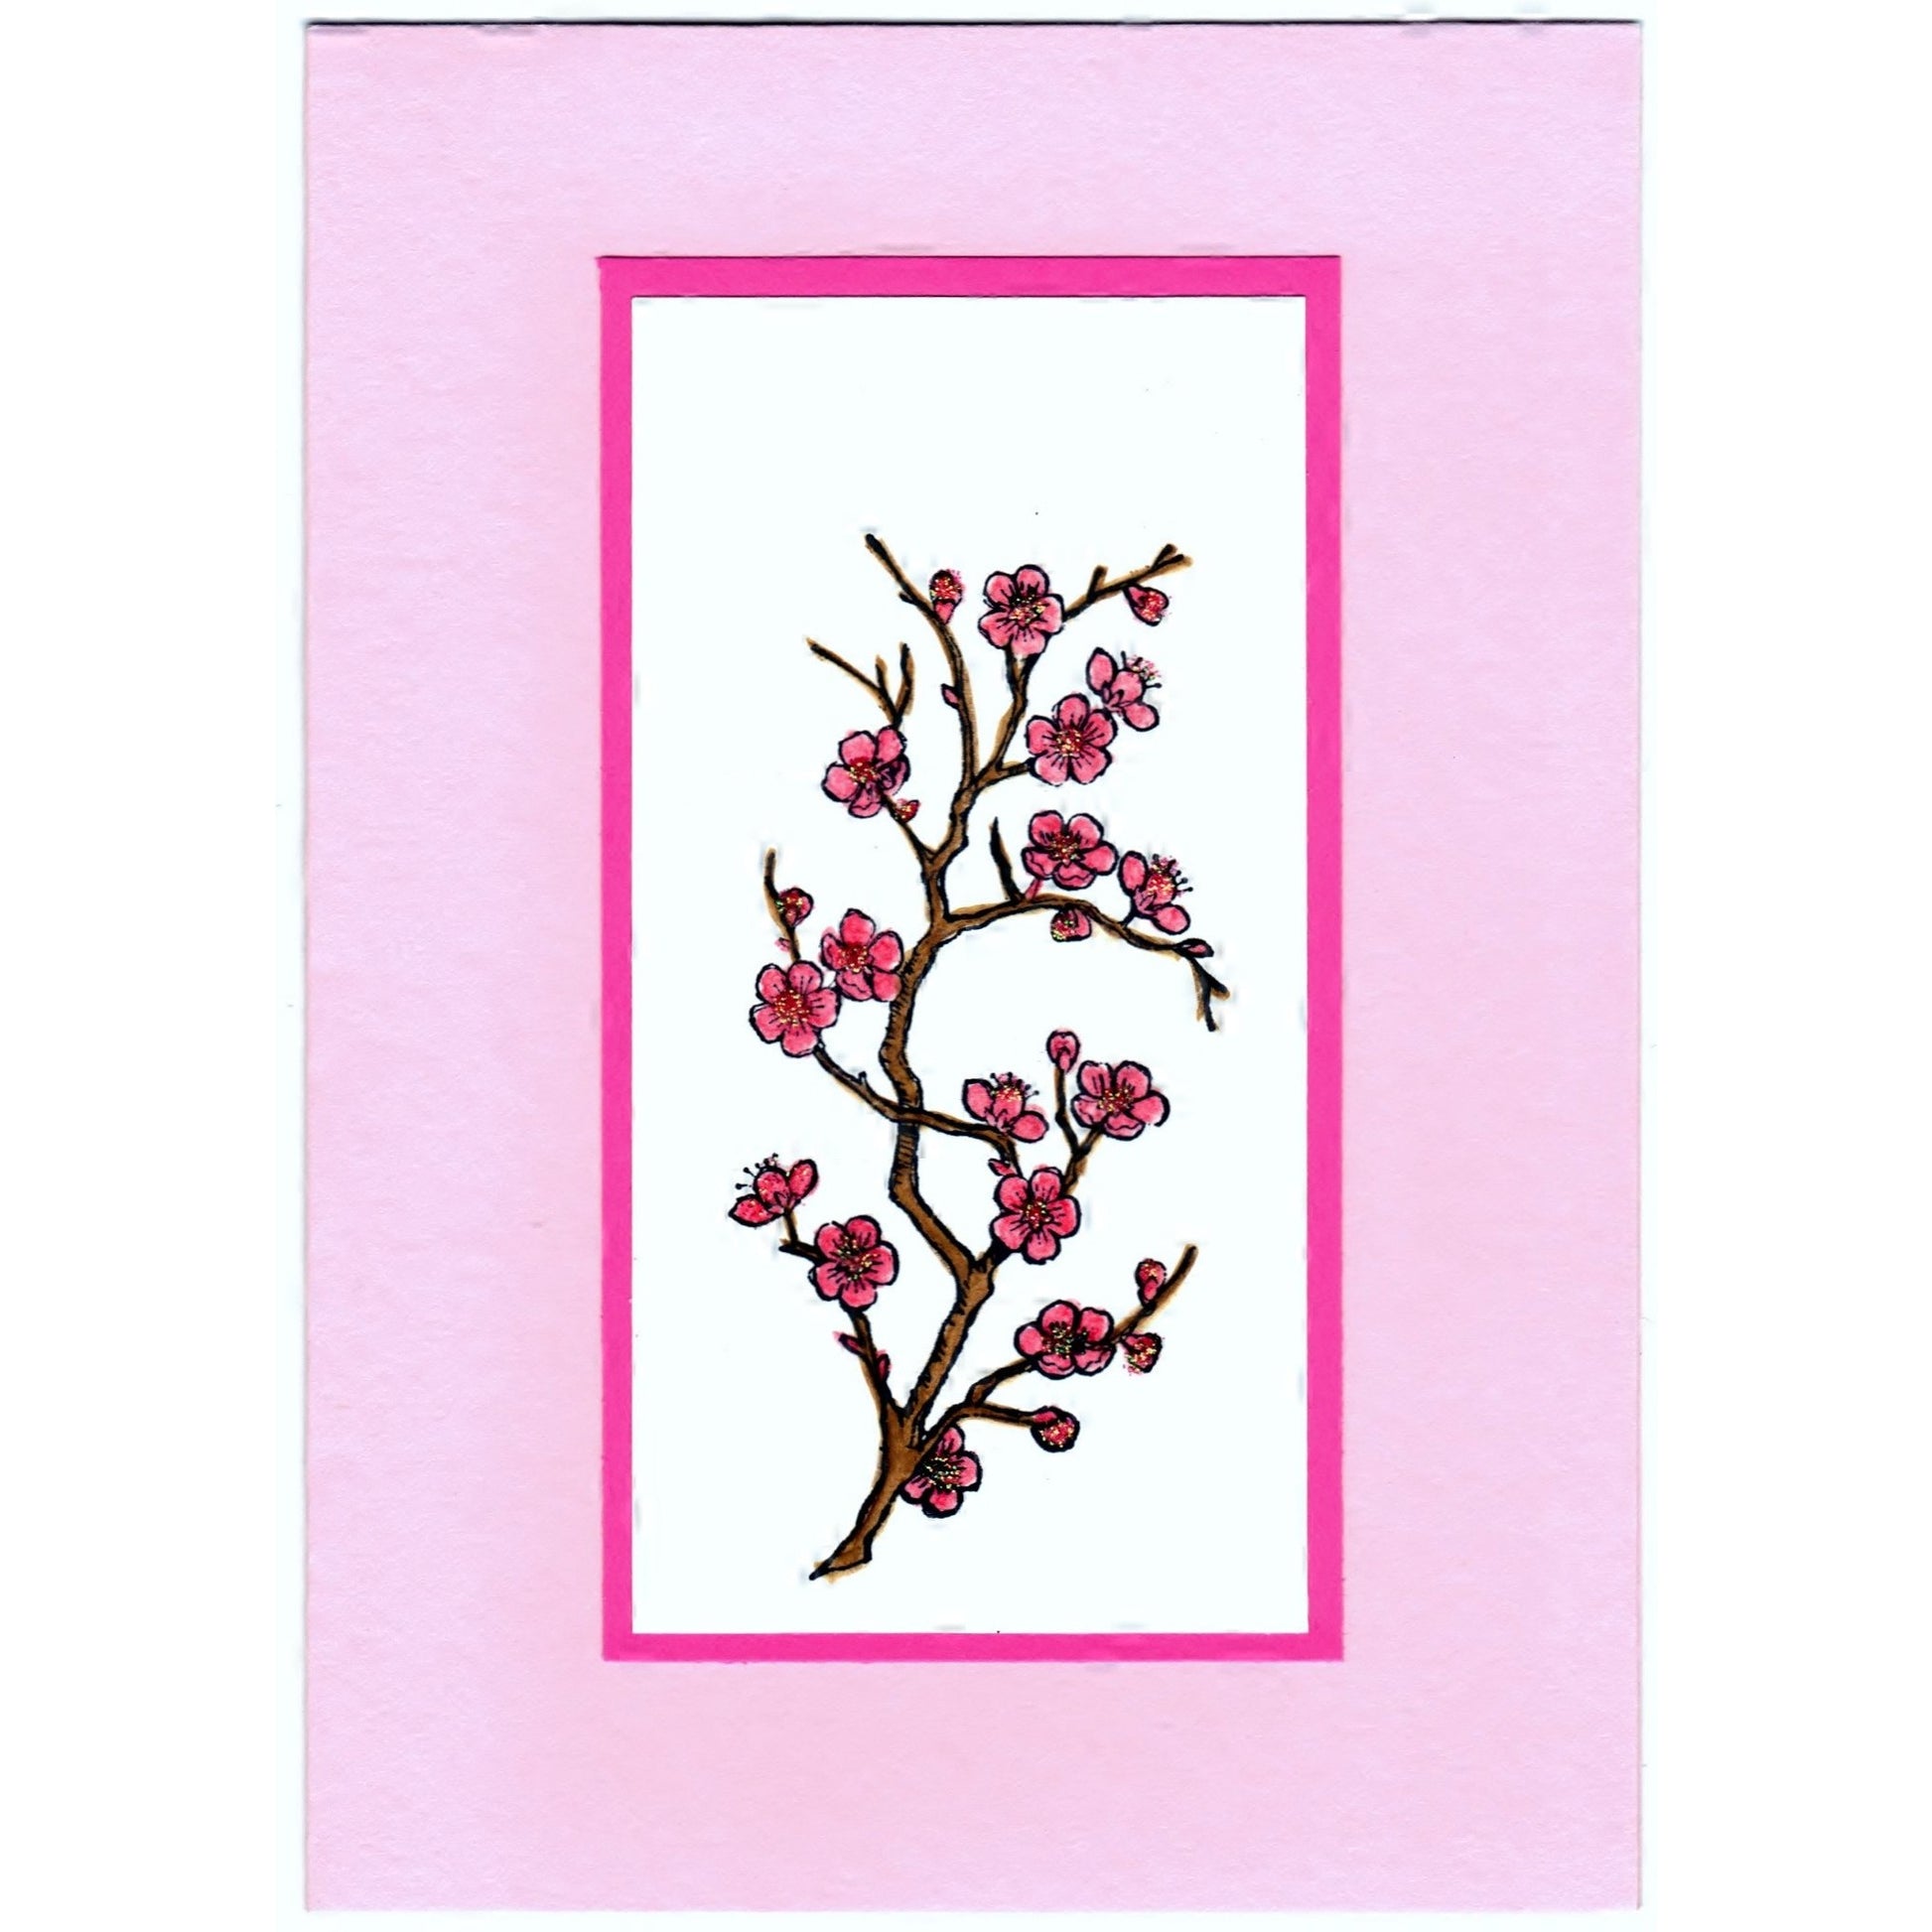 Flowery Tree Handmade Good Greeting Supply Card - Cards And Other Paper Products - Made In U.S.A. - SharPharMade - 1